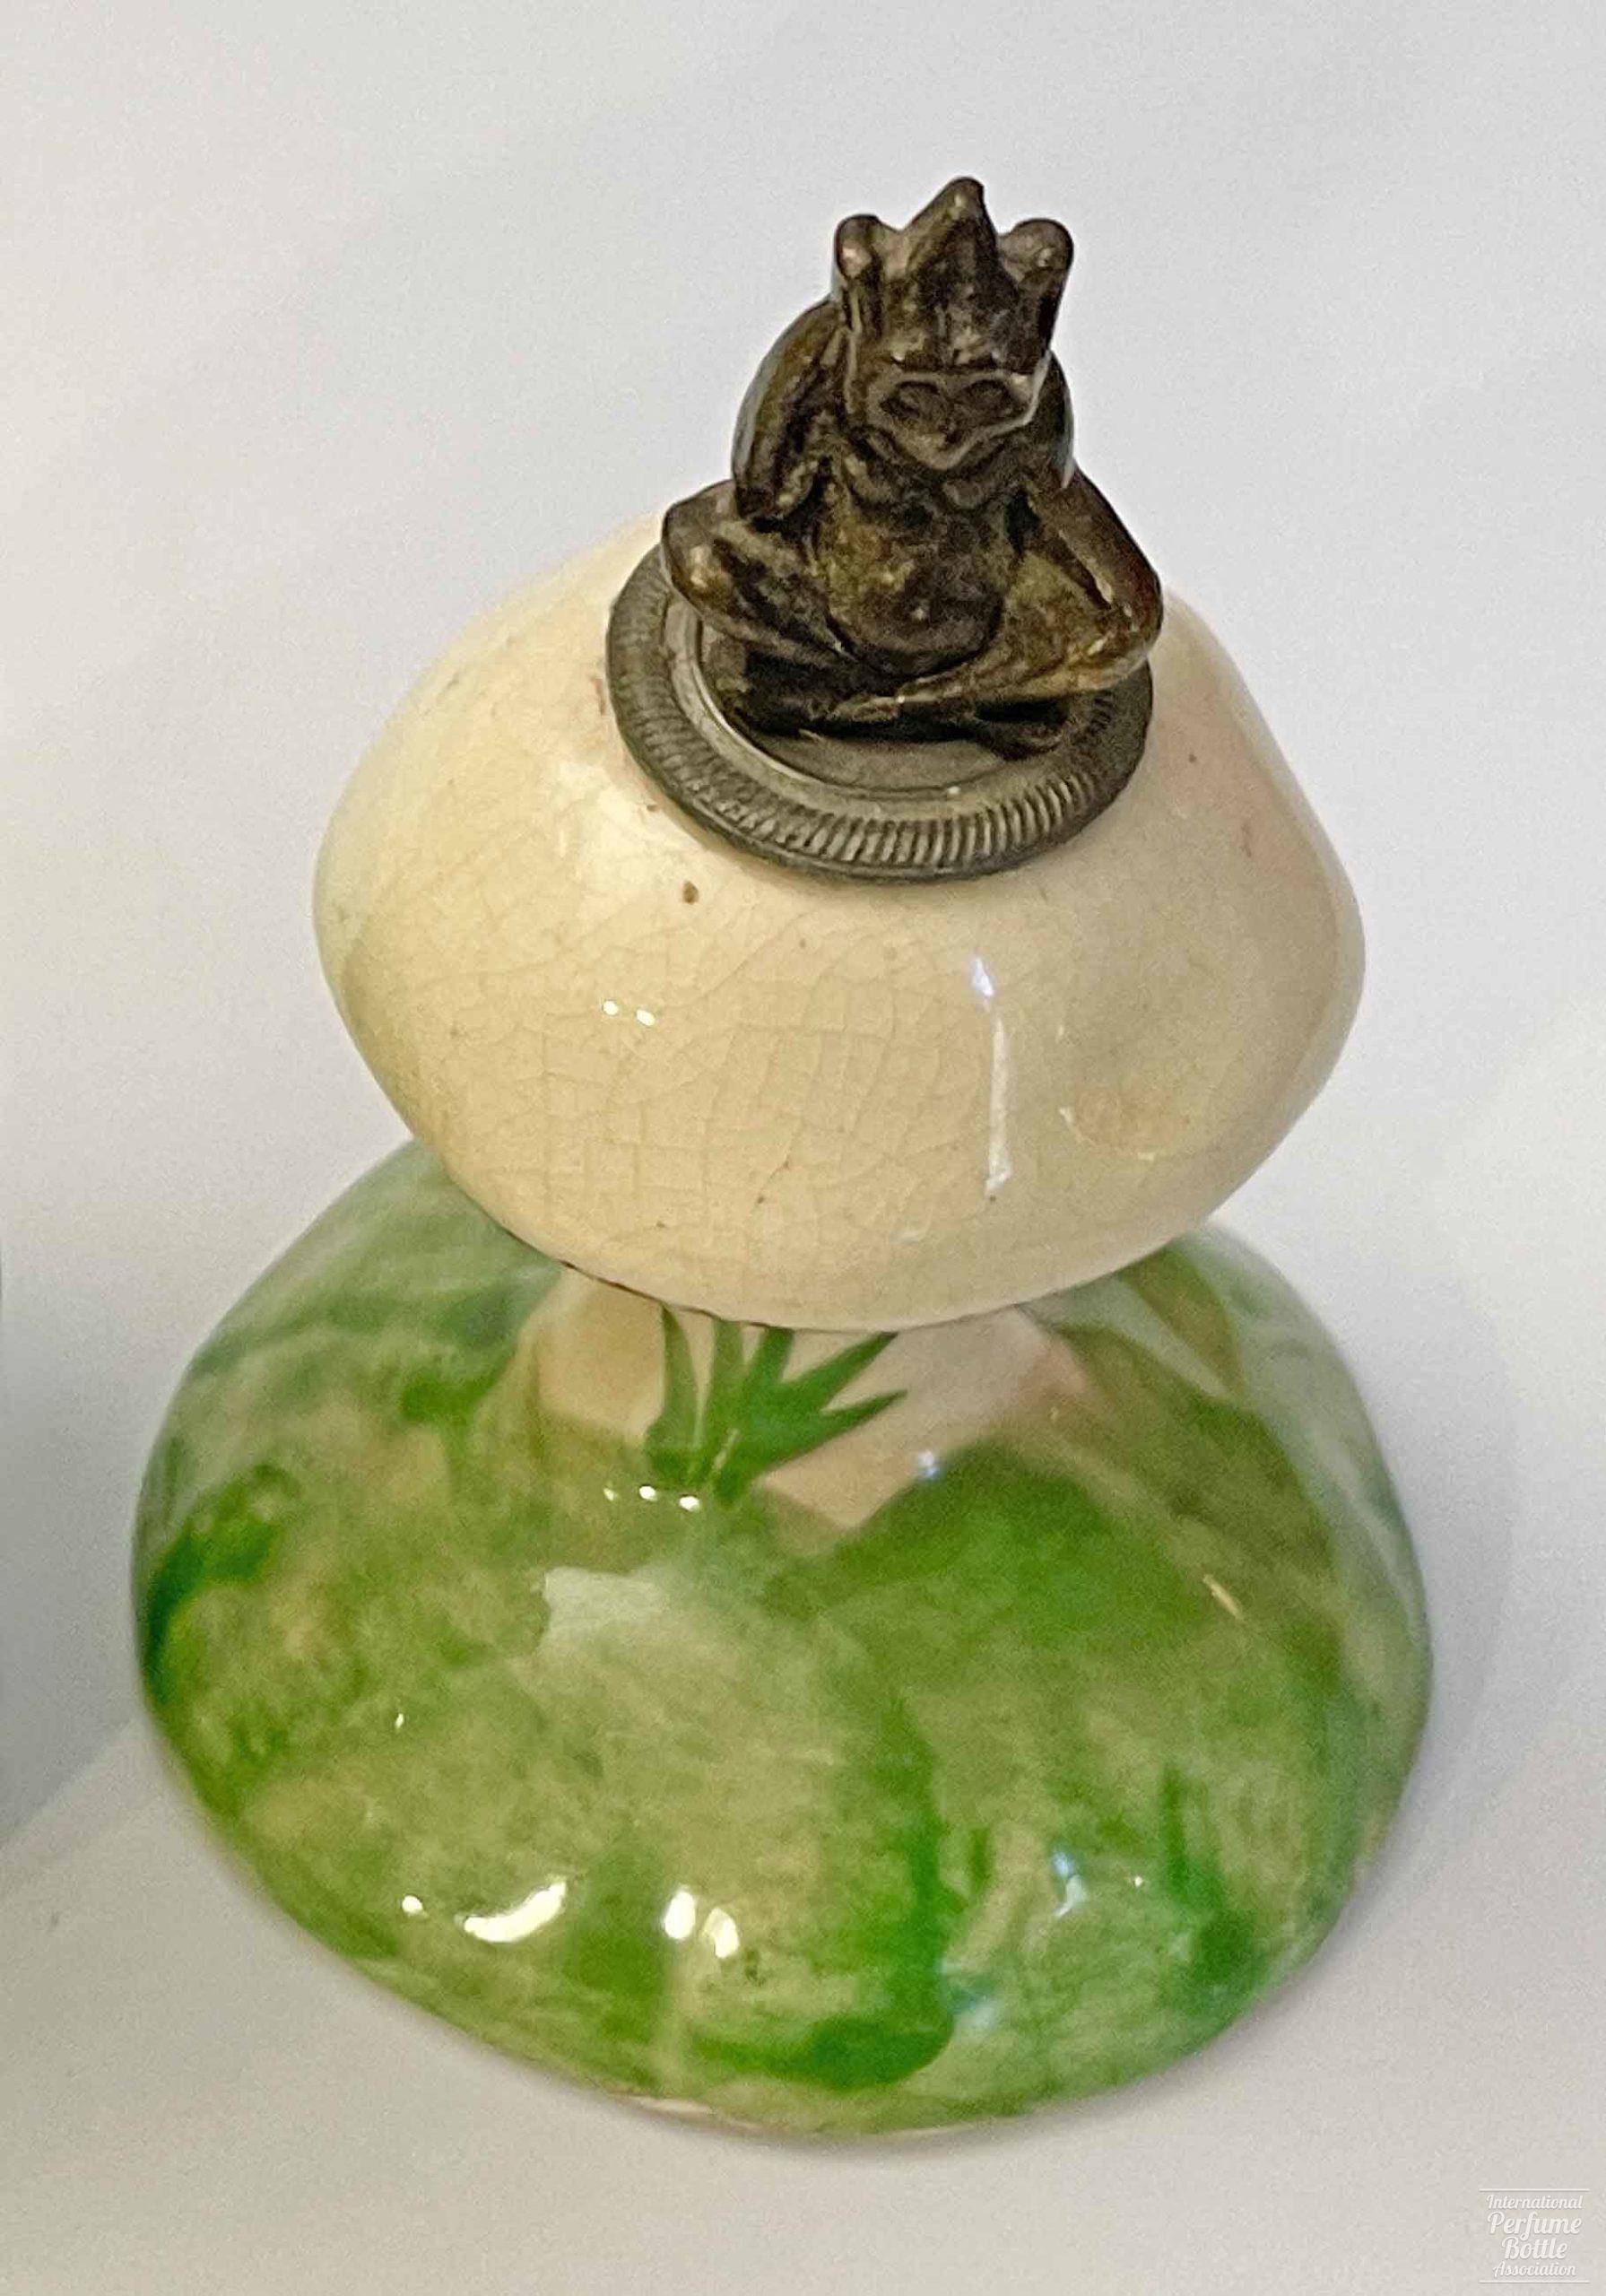 Ceramic Bottle With Pixie Stopper from Torquay